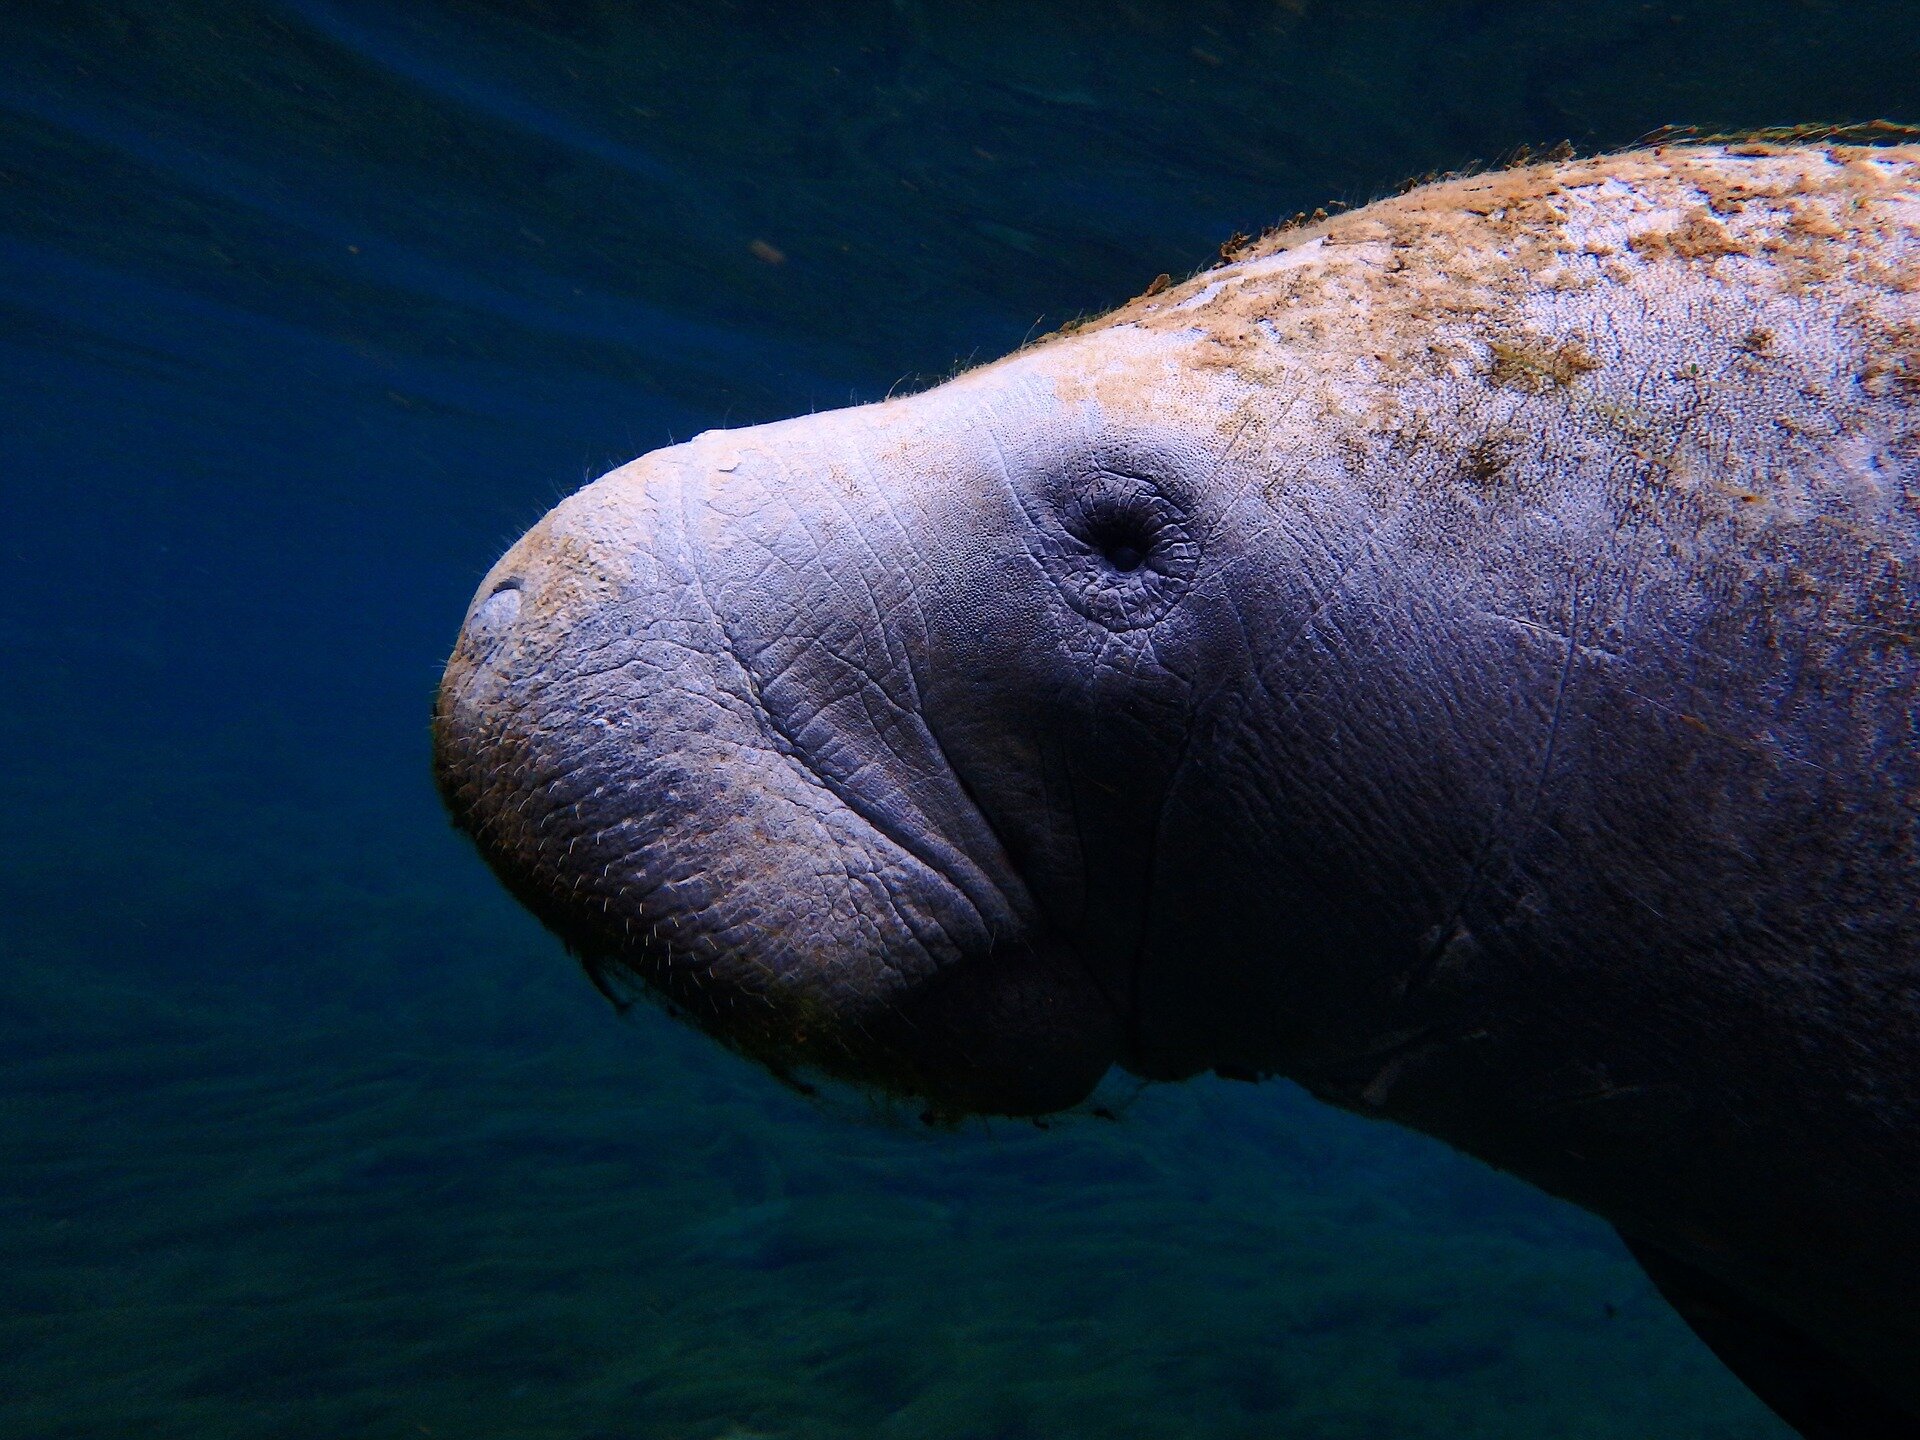 Deaths of Florida's starving manatees surge amid winter chill